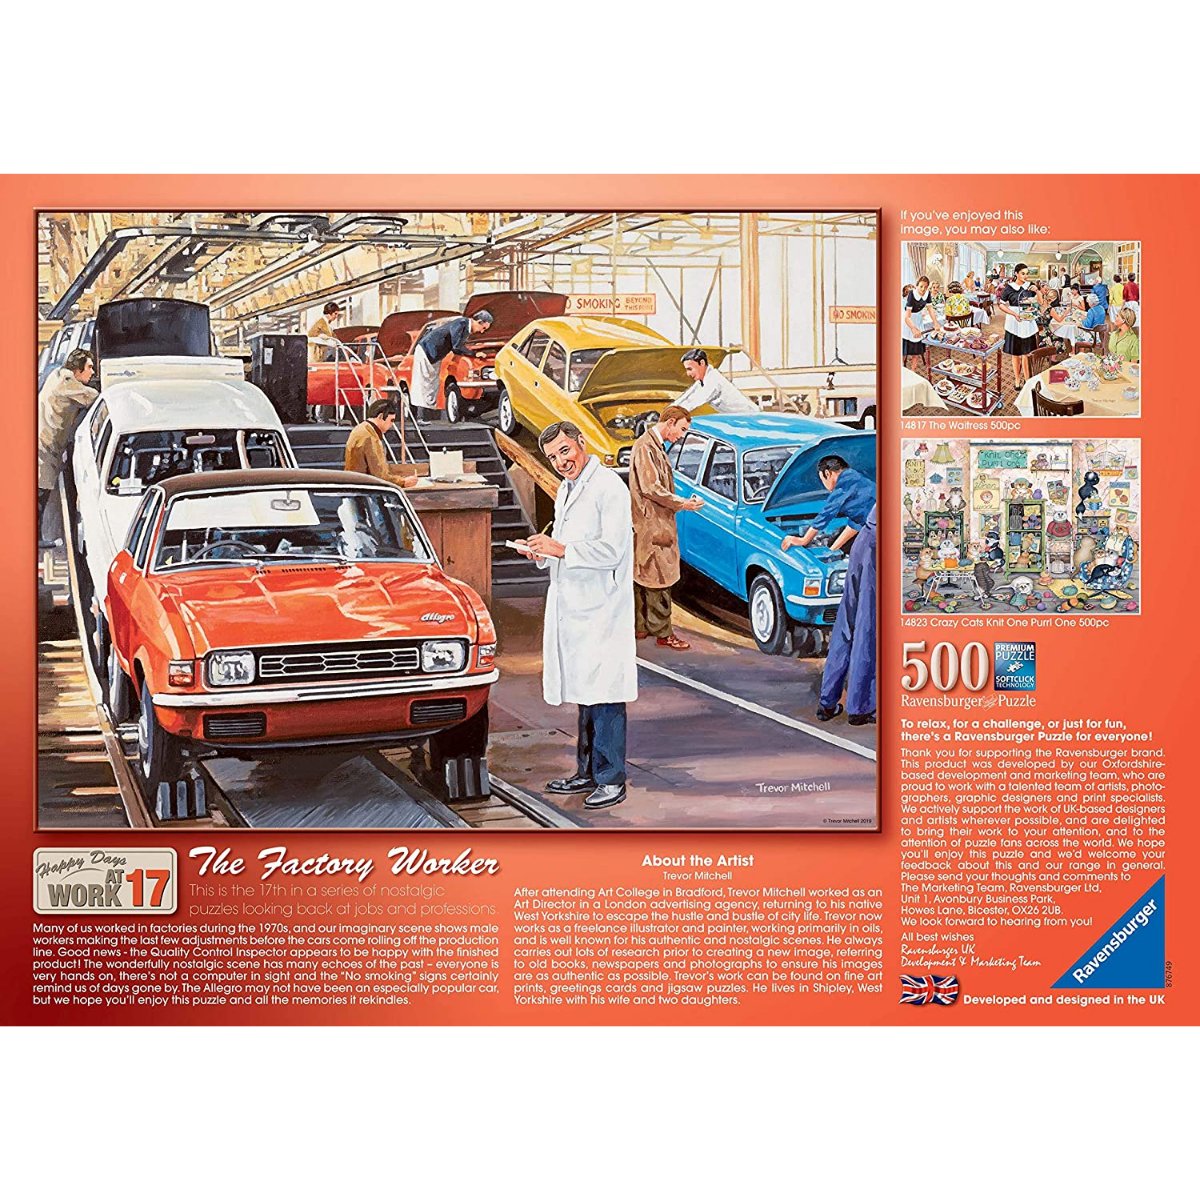 Ravensburger Happy Days at Work No.17 - The Factory Worker 500 Piece Jigsaw Puzzle - Phillips Hobbies